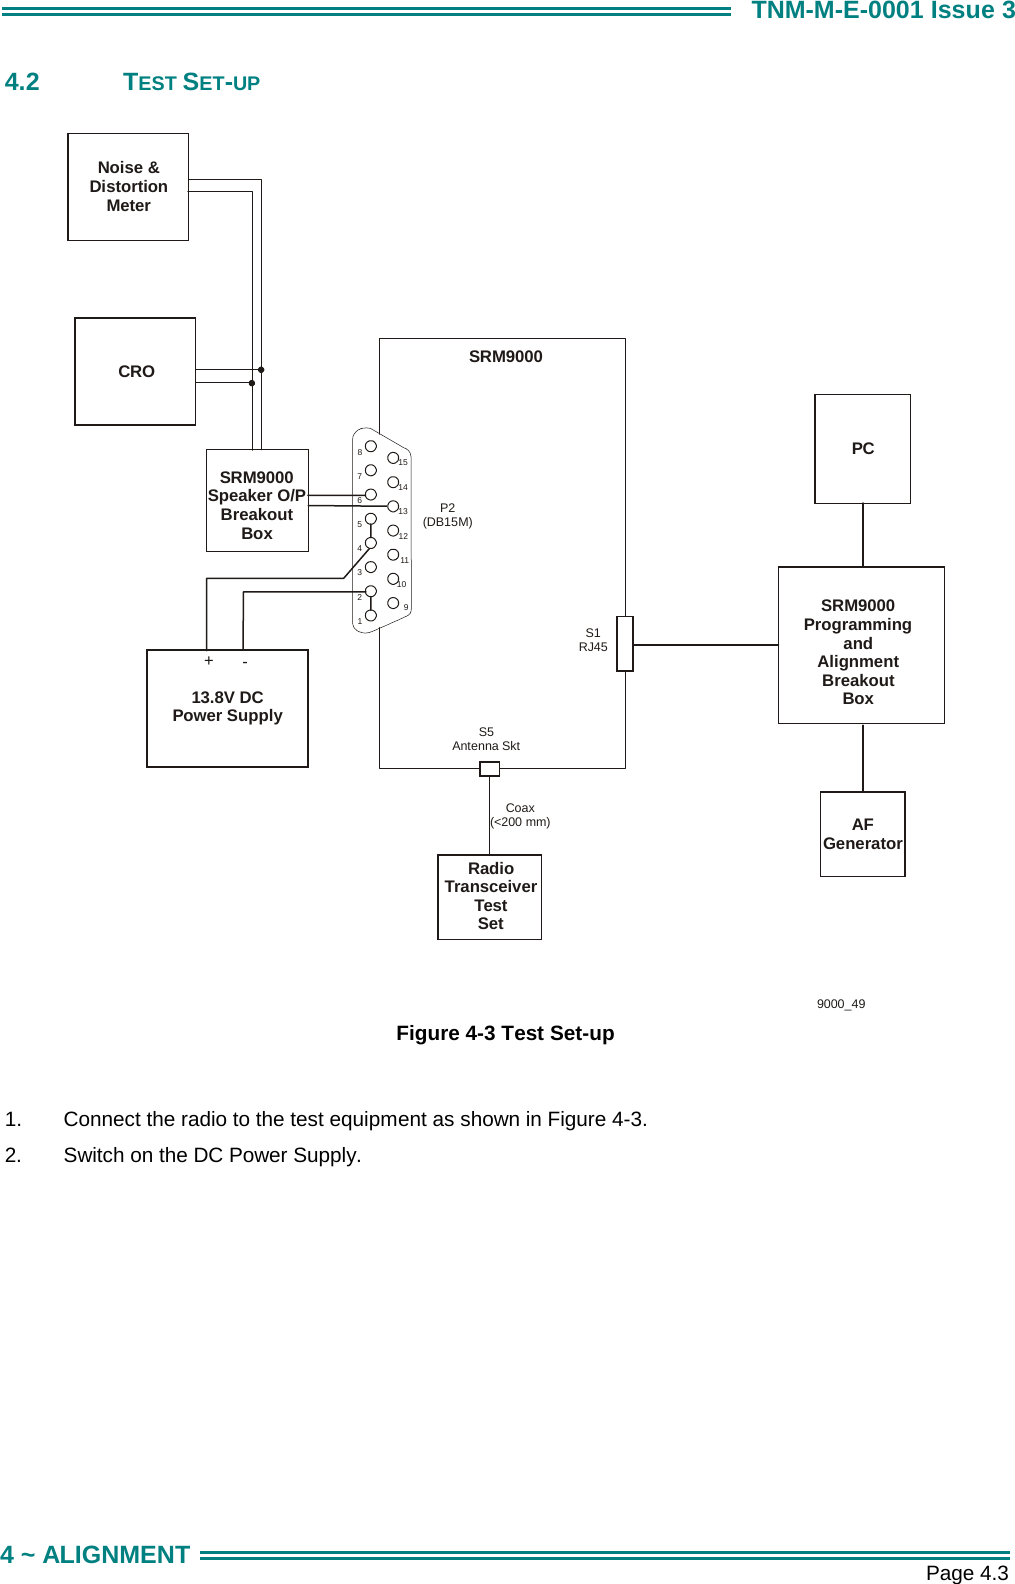       Page 4.3 4 ~ ALIGNMENT TNM-M-E-0001 Issue 3 4.2 TEST SET-UP                          Figure 4-3 Test Set-up  1.  Connect the radio to the test equipment as shown in Figure 4-3. 2.  Switch on the DC Power Supply.  765432181514131211109SRM9000P2(DB15M)PCSRM9000ProgrammingandAlignmentBreakoutBoxS5Antenna SktS1RJ45AFGenerator13.8V DCPower SupplyCRO9000_49+-RadioTransceiverTestSetNoise &amp;DistortionMeterSRM9000Speaker O/PBreakoutBoxCoax(&lt;200 mm)